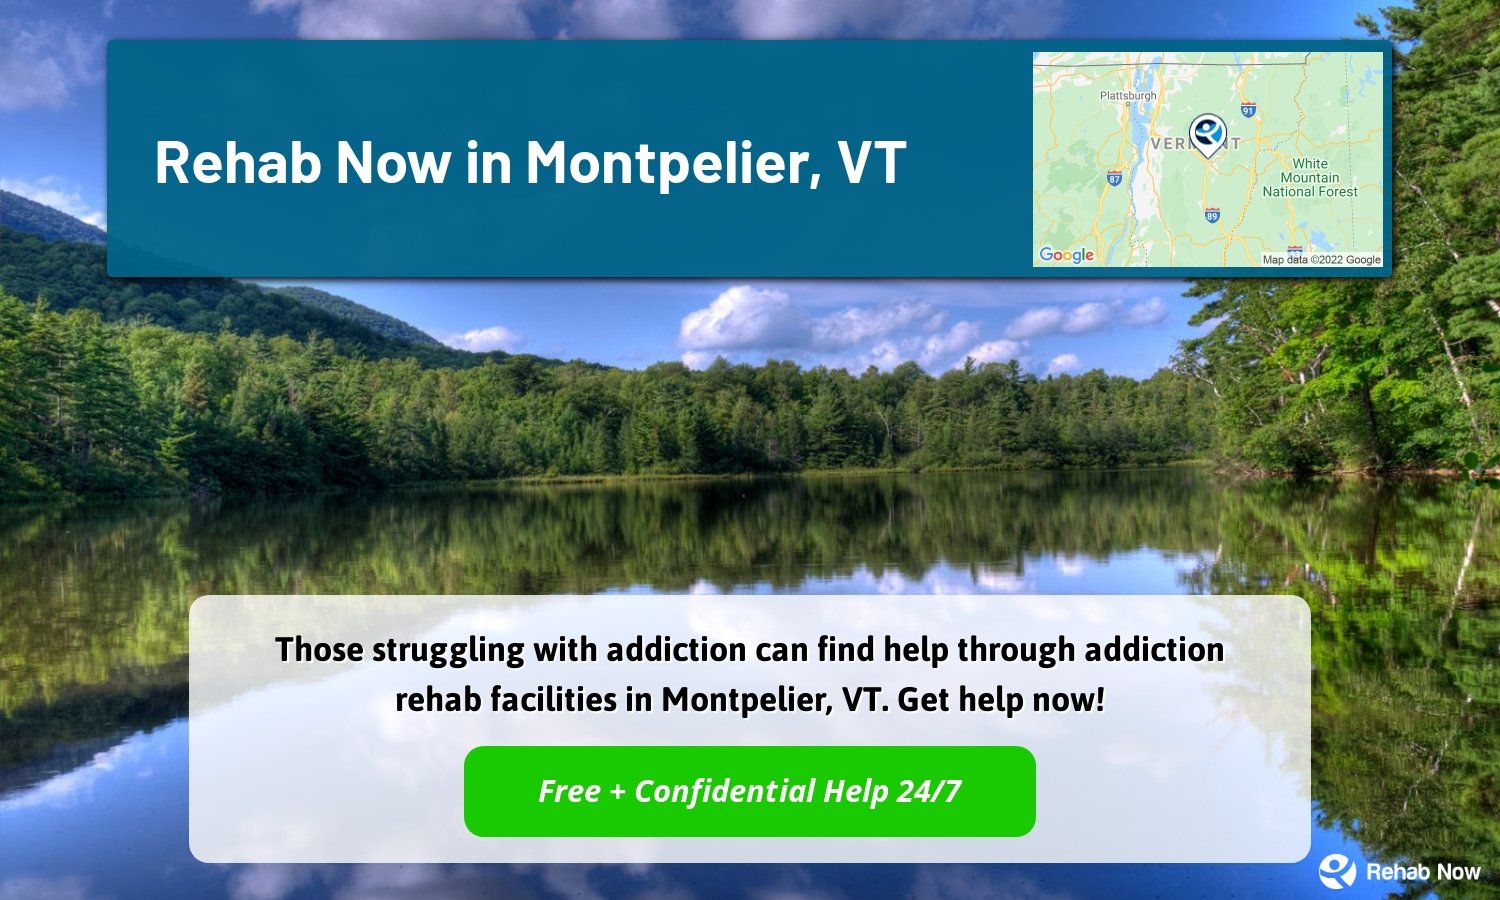 Those struggling with addiction can find help through addiction rehab facilities in Montpelier, VT. Get help now!